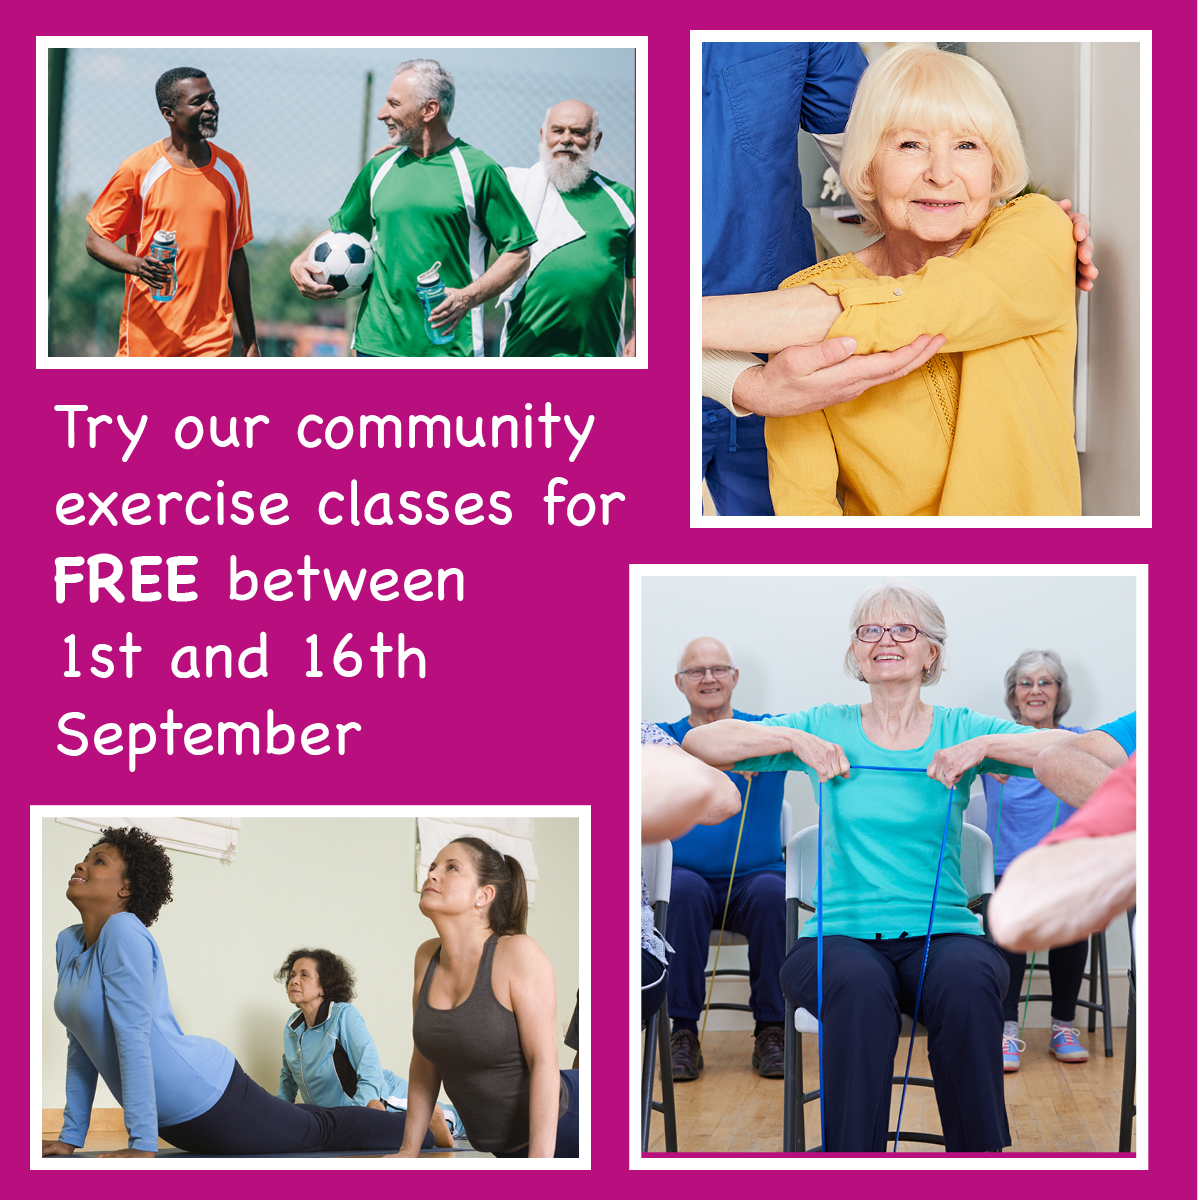 Get fit for free in September